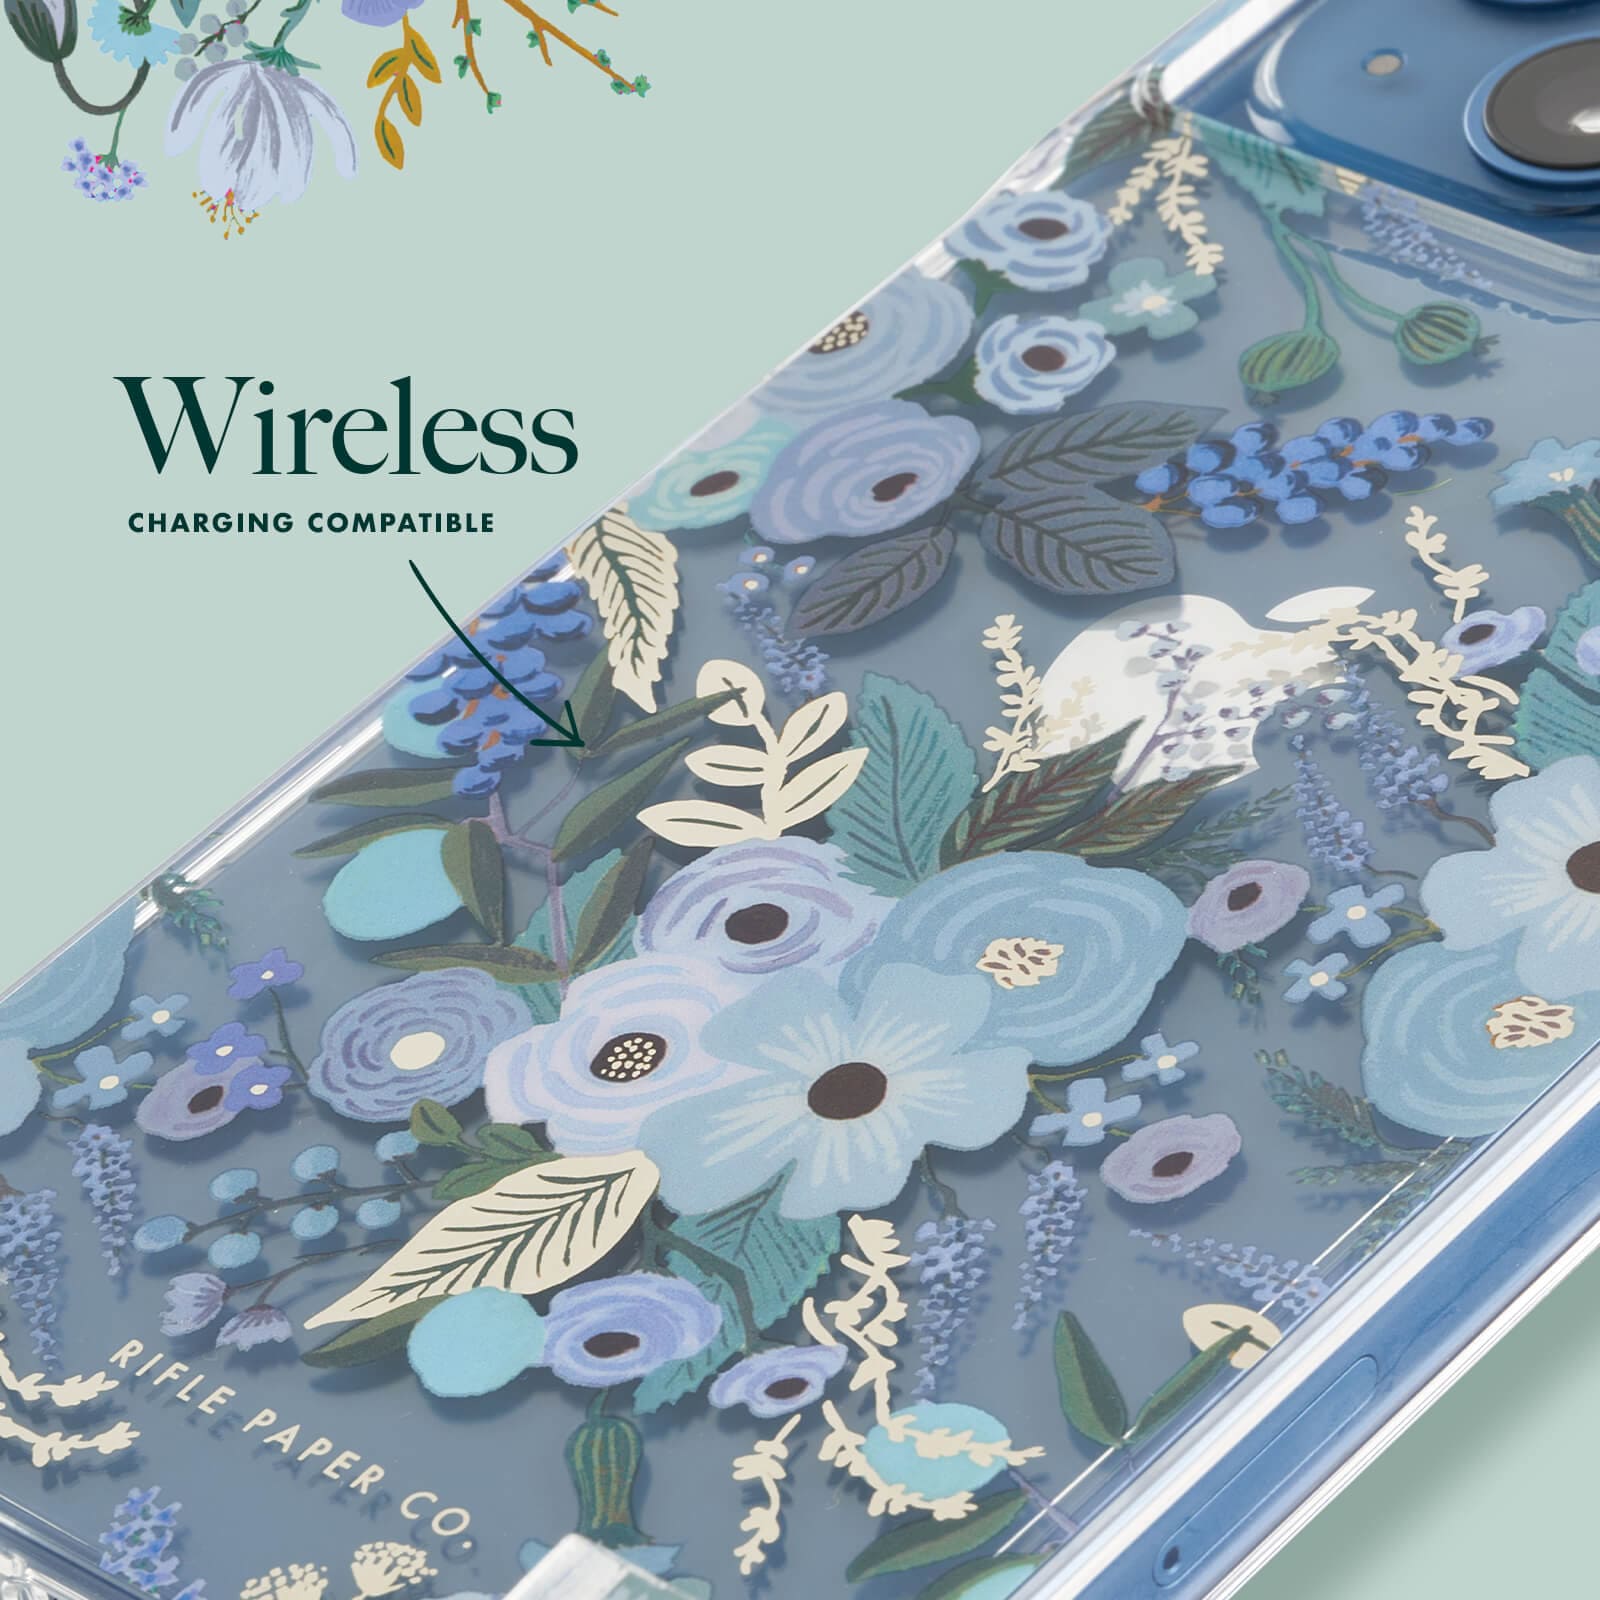 Wireless charging compatible. color::Garden Party Blue